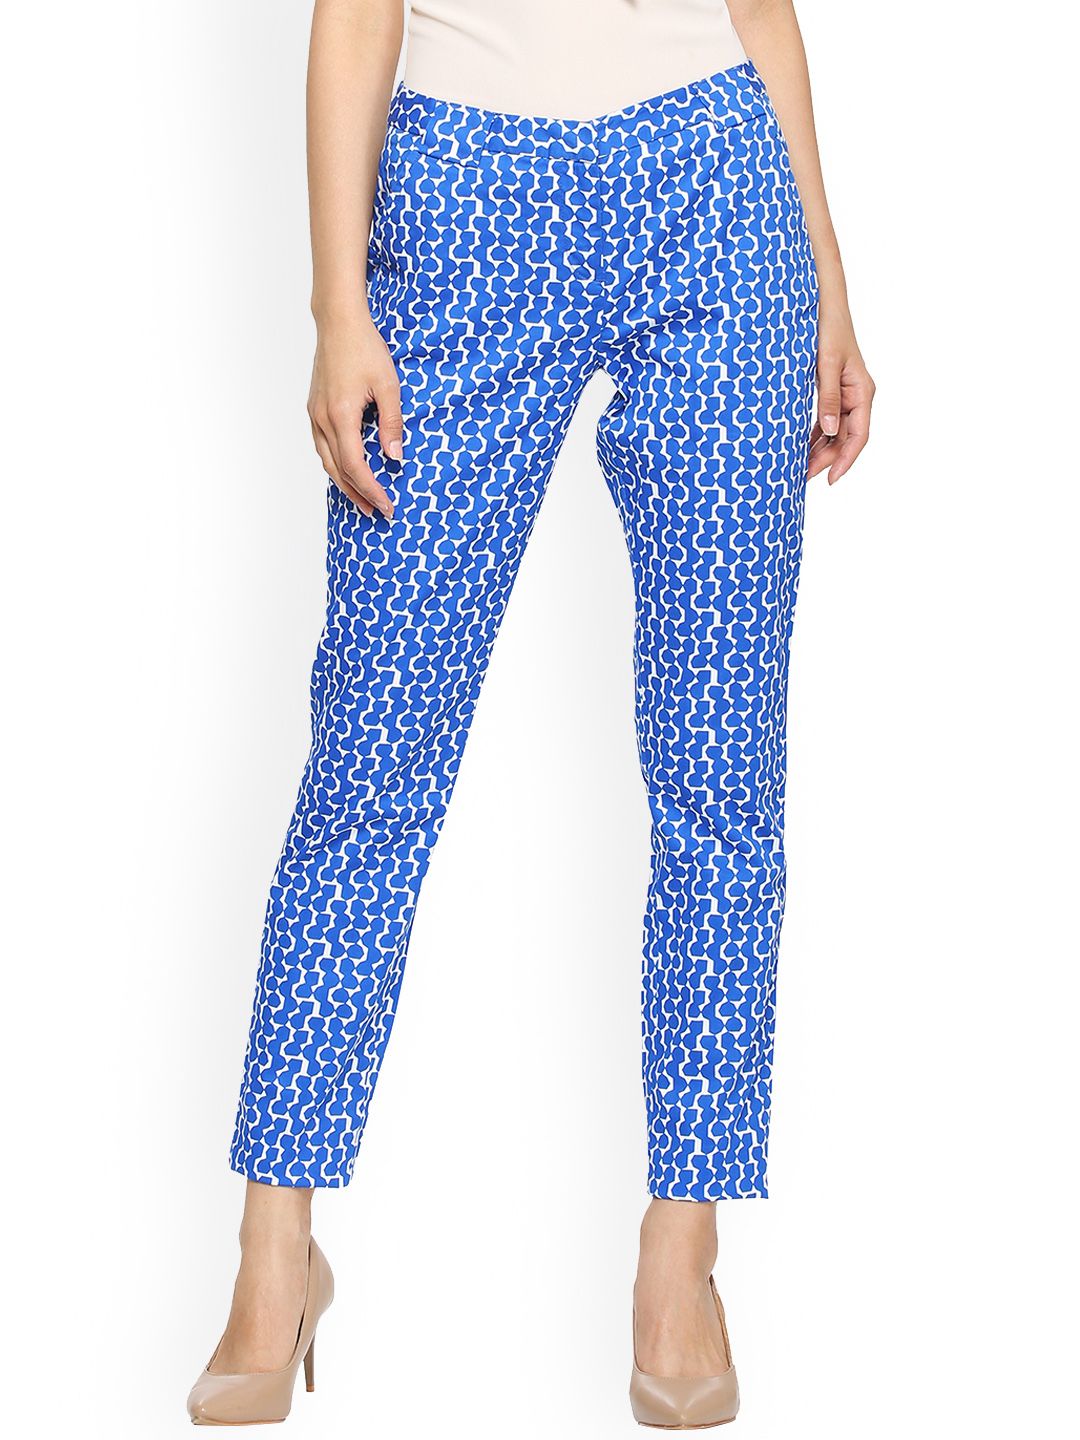 Allen Solly Woman Blue & White Regular Fit Printed Regular Cropped Trousers Price in India